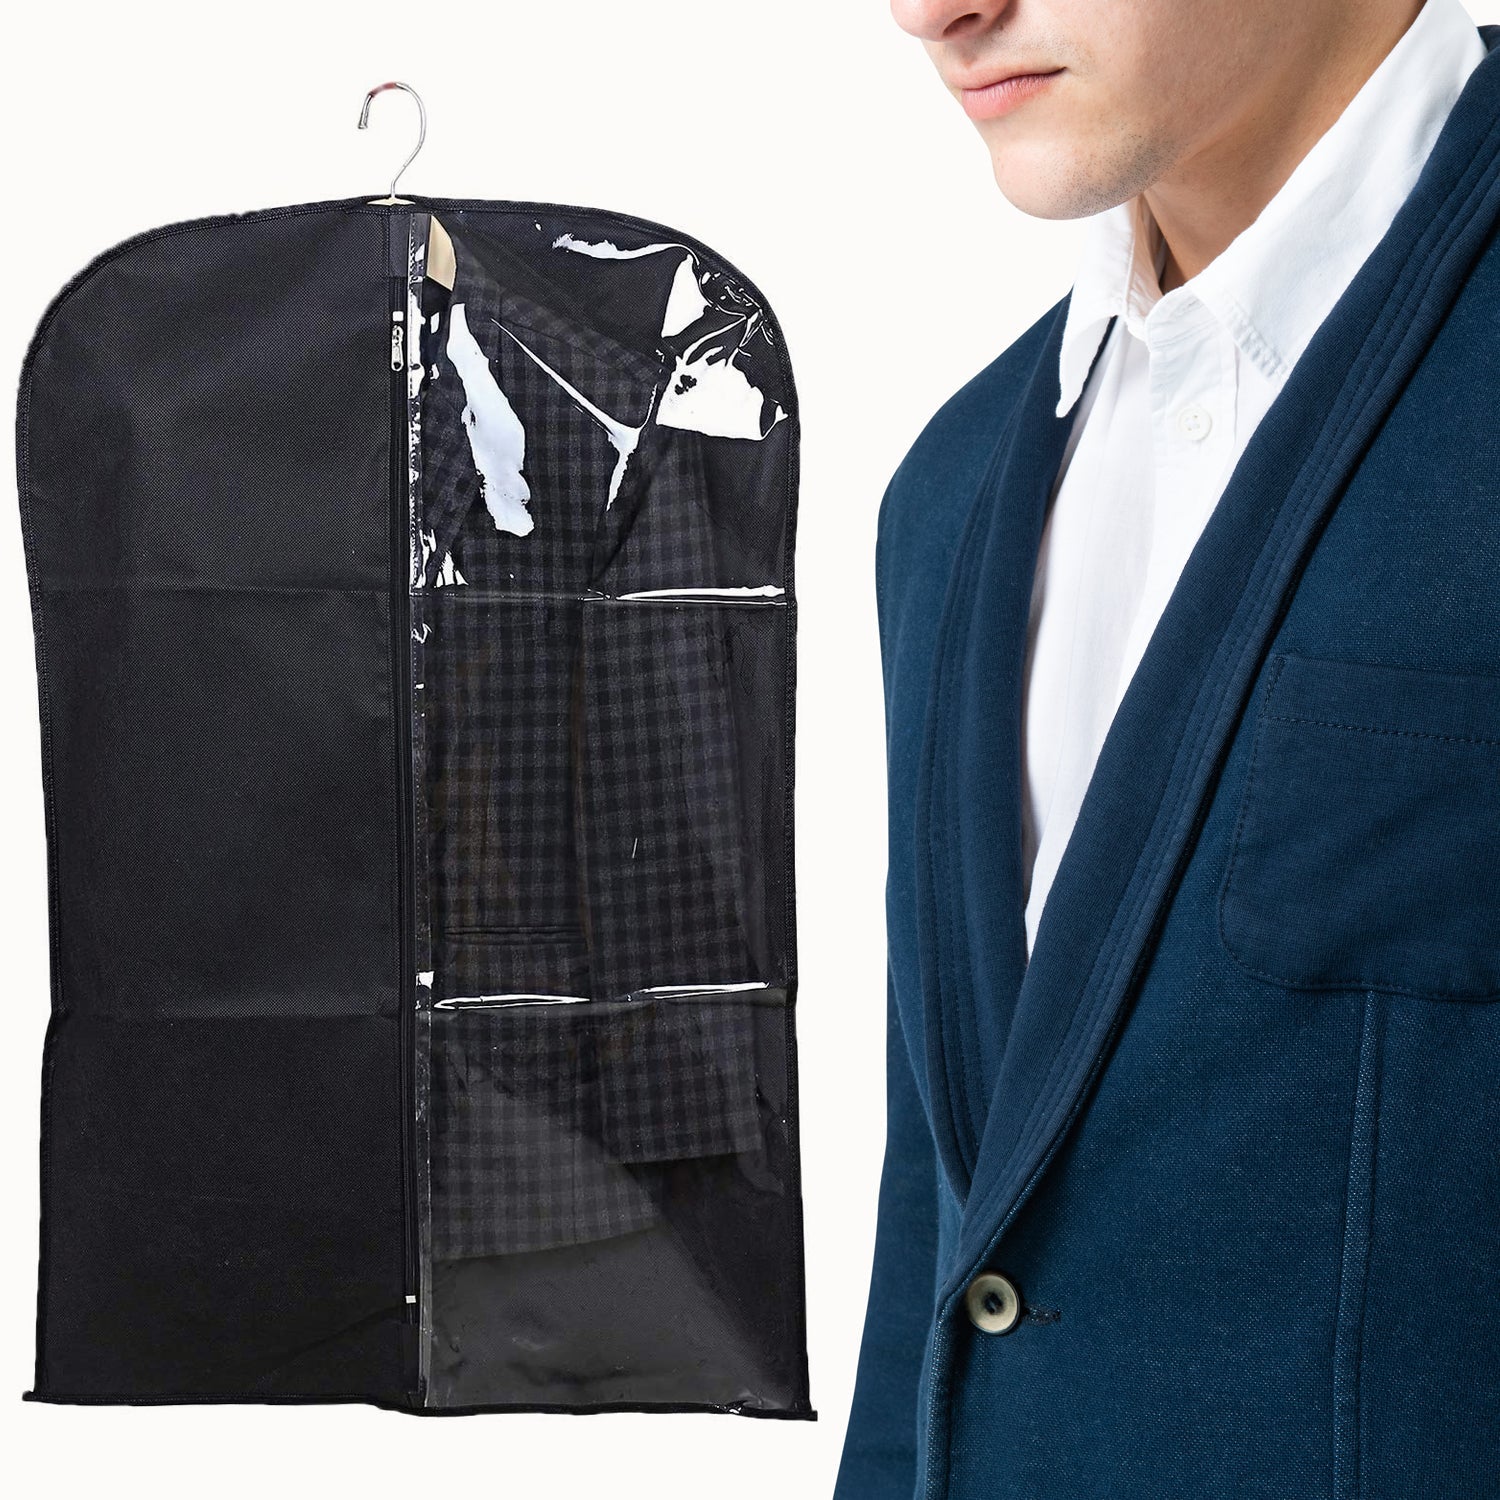 6225A Coat Blazer Cover Half Transparent Cover For Multi Use Cover